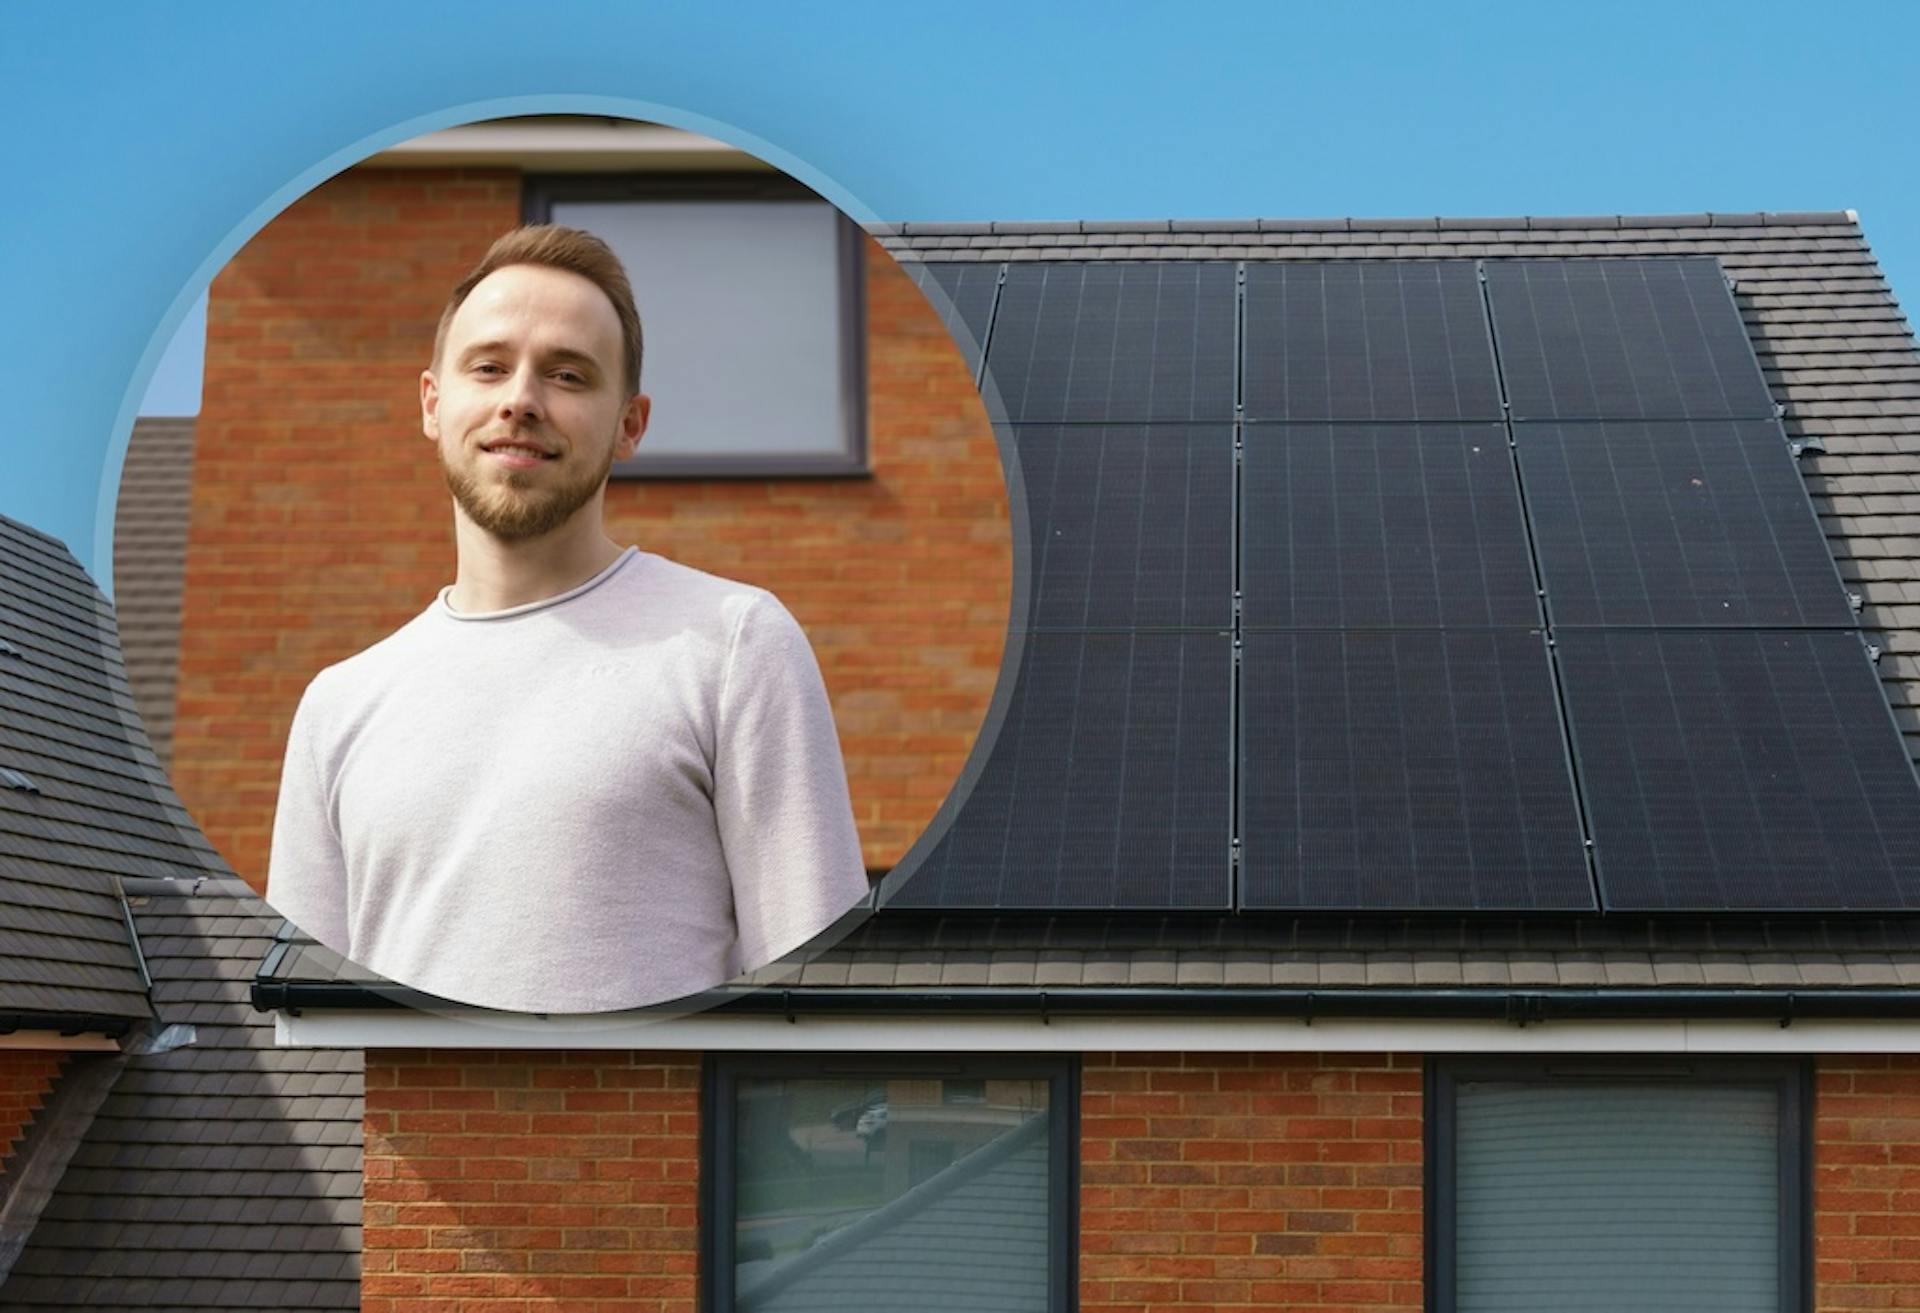 Circle including a smiling man in a white jumper, against a background of a house with black solar panels on its roof, blue sky in background